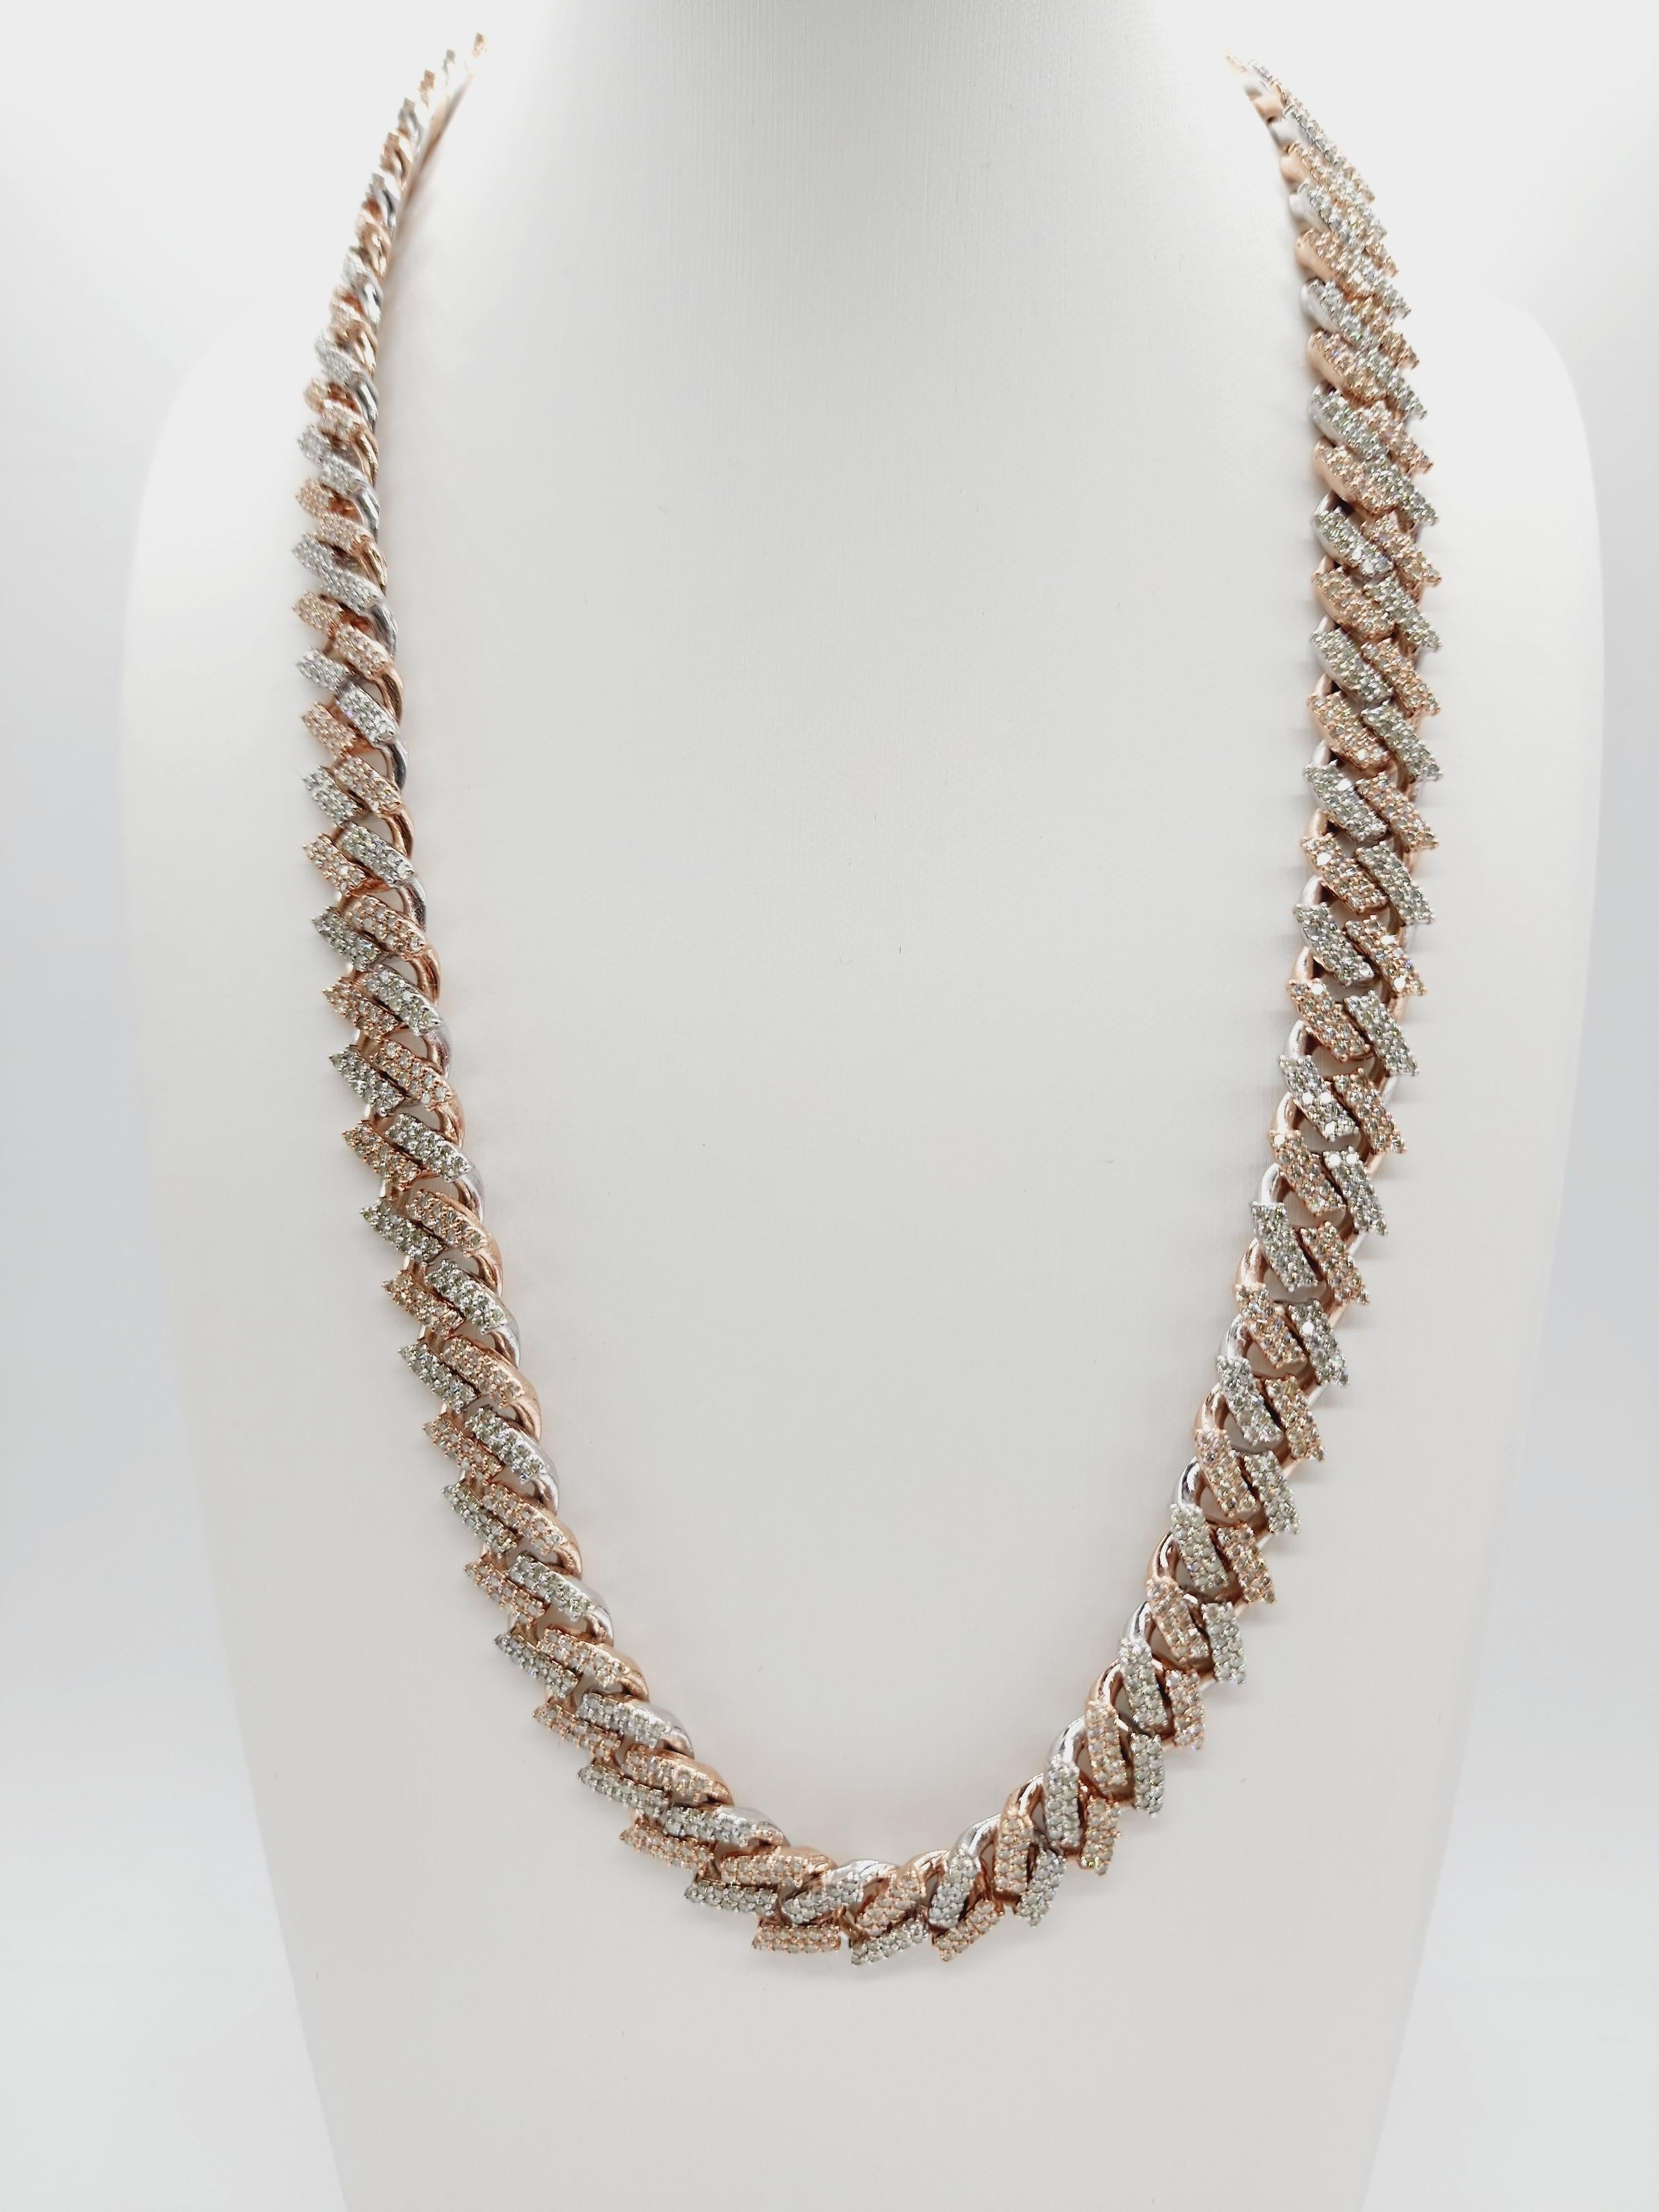 22.30 Carats Total Weight Heavy Gold Cuban Necklace Chain 14 Karats Rose Gold
Two Tone Rose and White Gold
22 inch, 12 mm wide, Average Color I, Clarity SI, Natural Diamonds. 